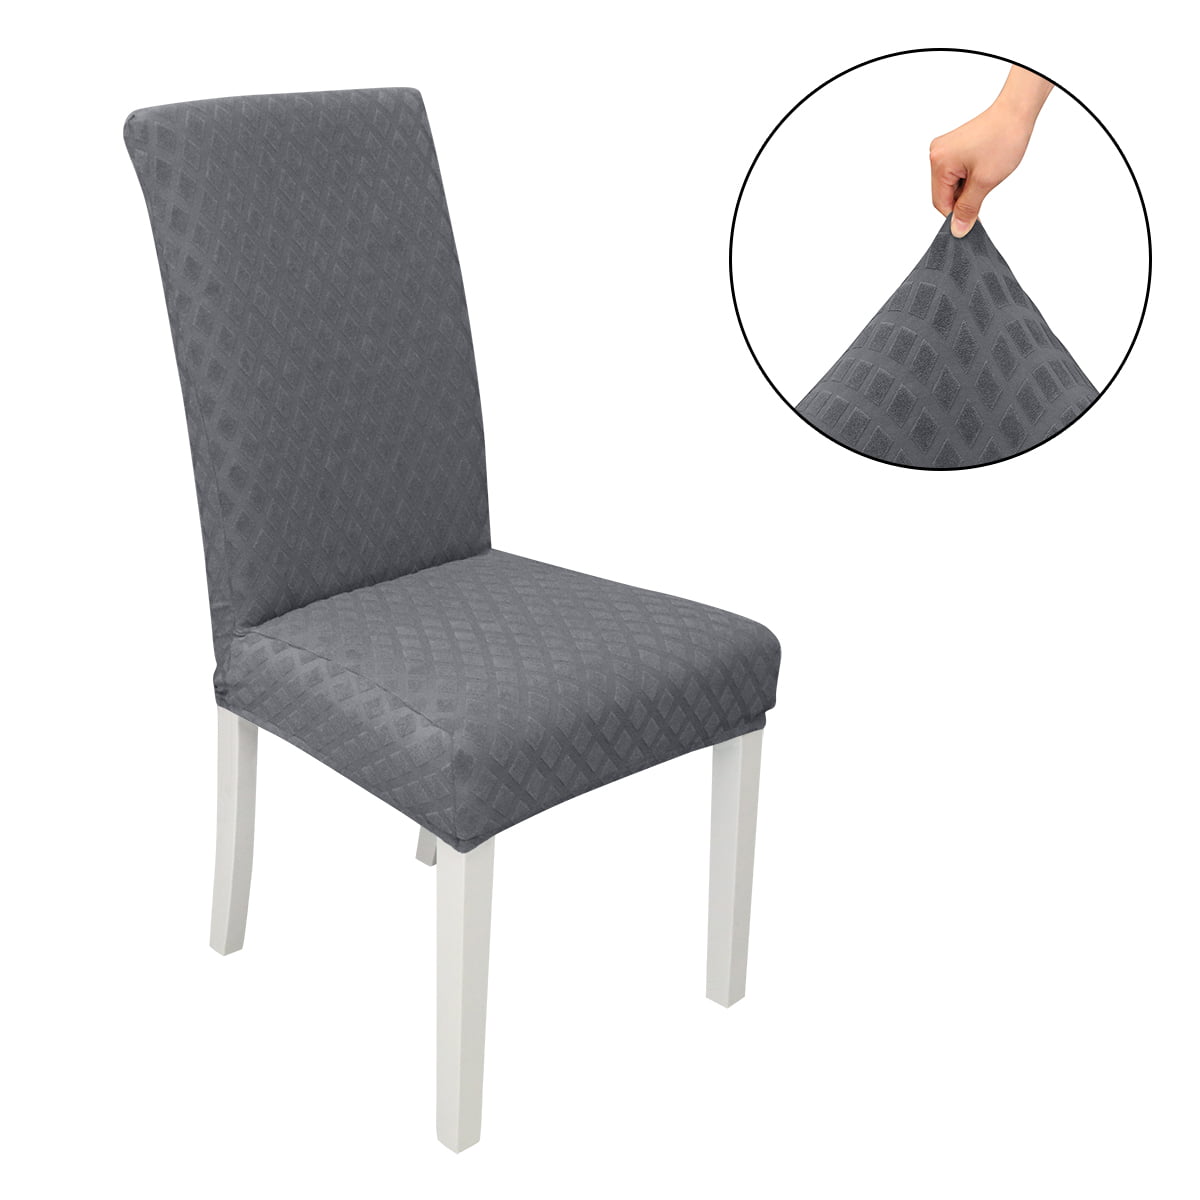 Details about   Dining Chair Covers Jacquard High Elastic Slipcovers Seats Chairs Protector Home 